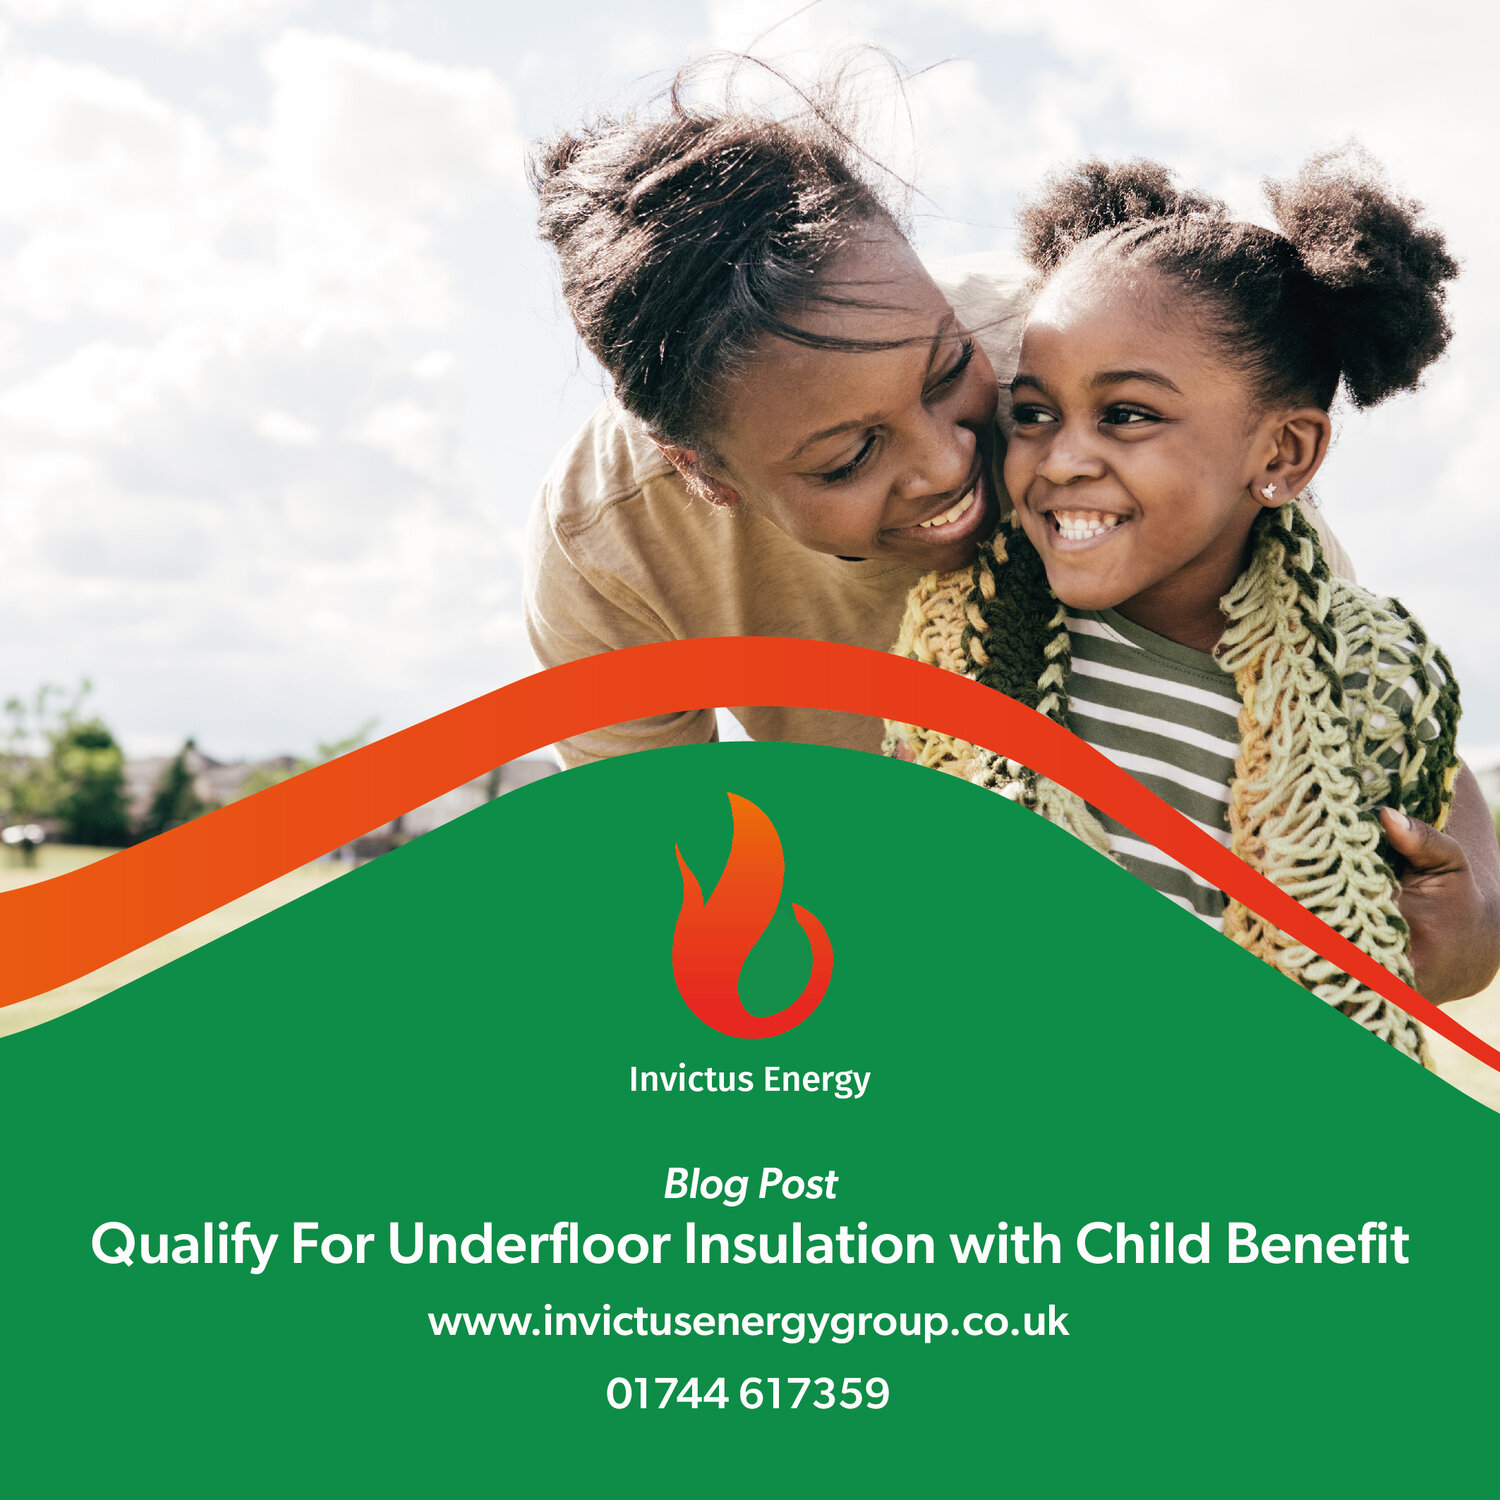 child-benefit-can-you-qualify-for-a-free-boiler-and-underfloor-insulation